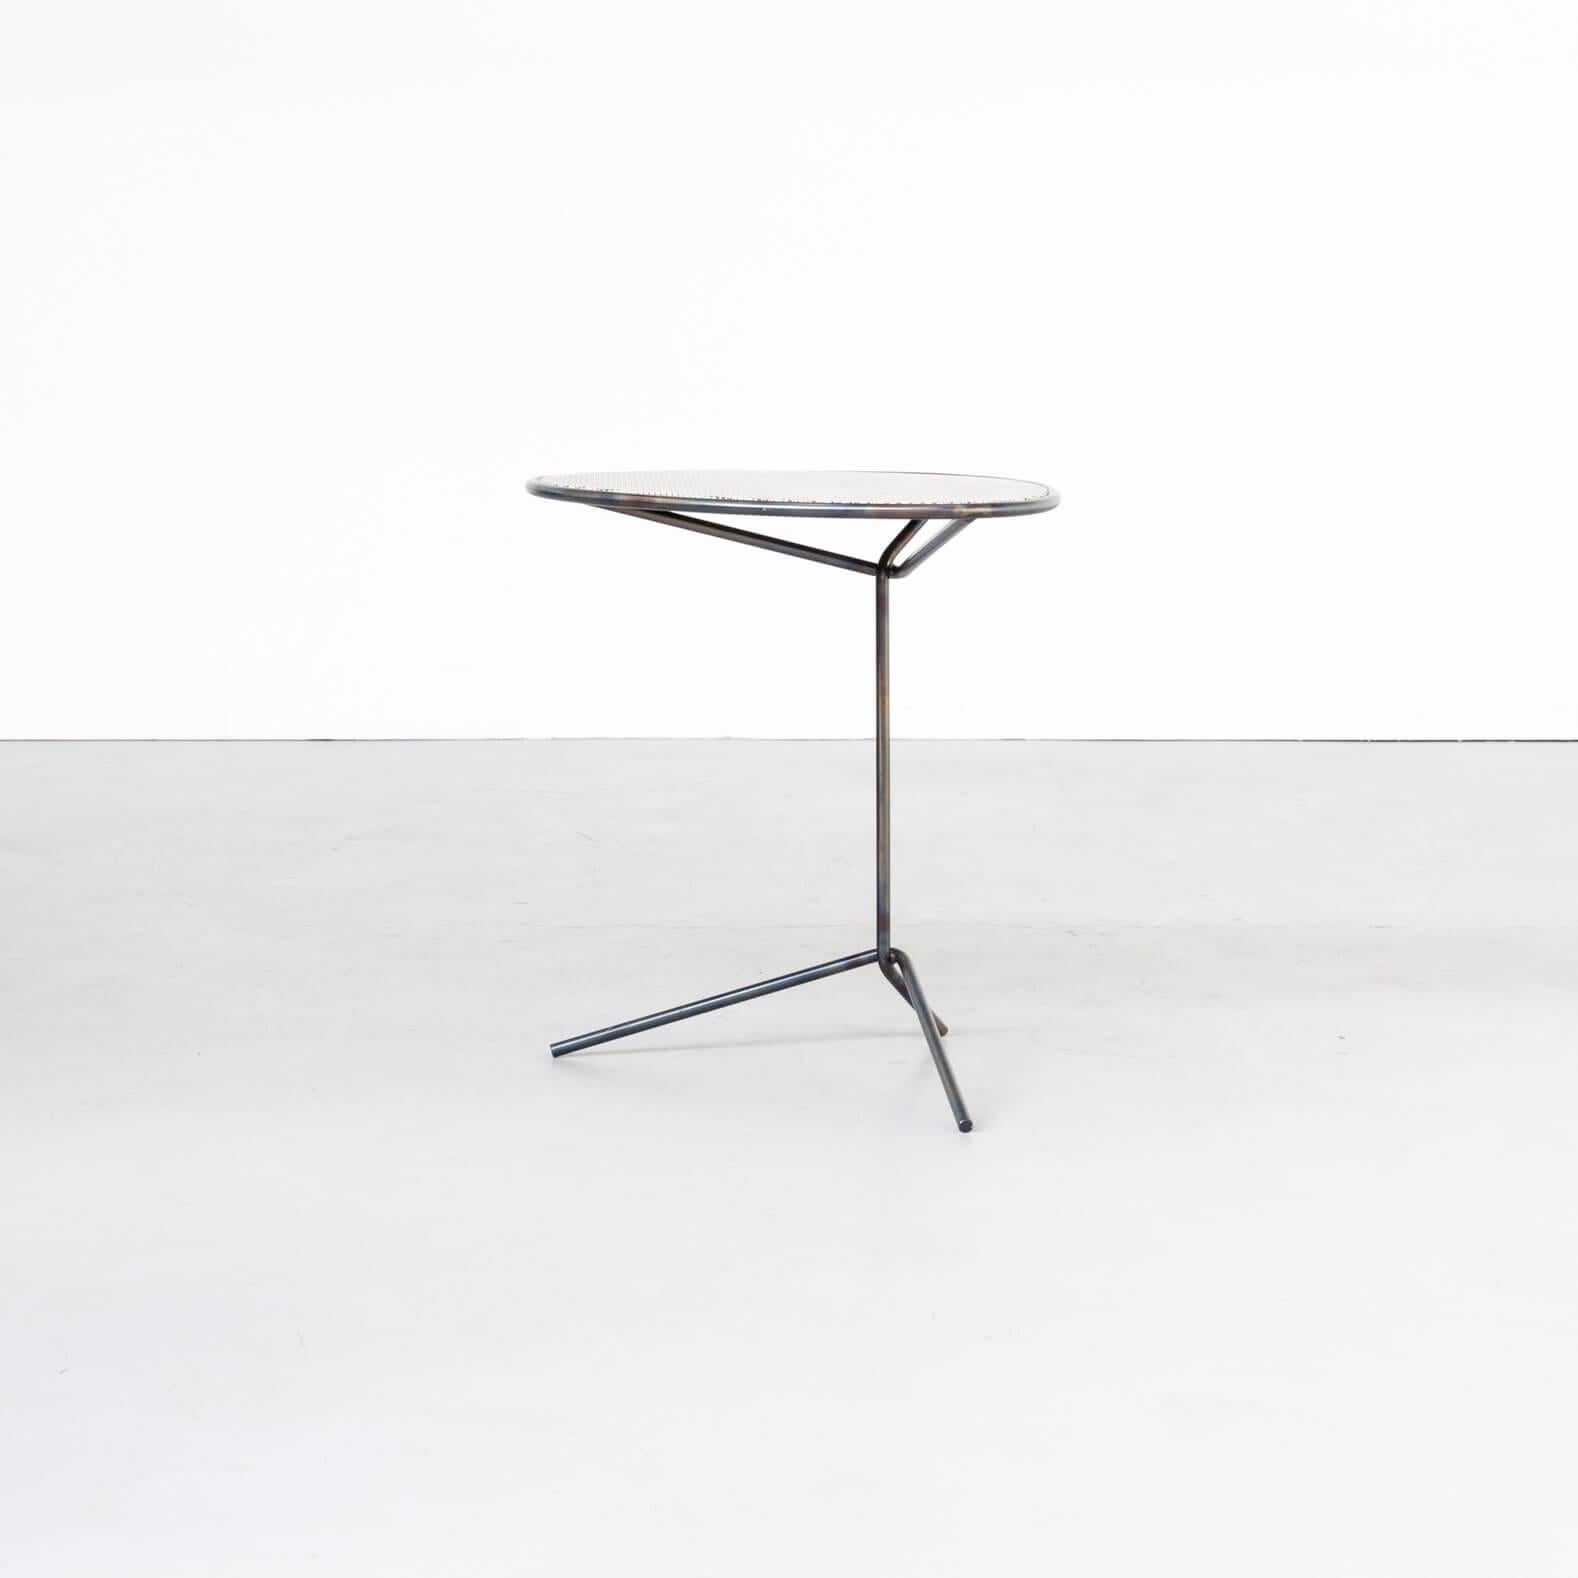 Blue steel Italian design side table for Baxter, Italy. Black and white fabric tabletop. Good condition consistent with age and use.